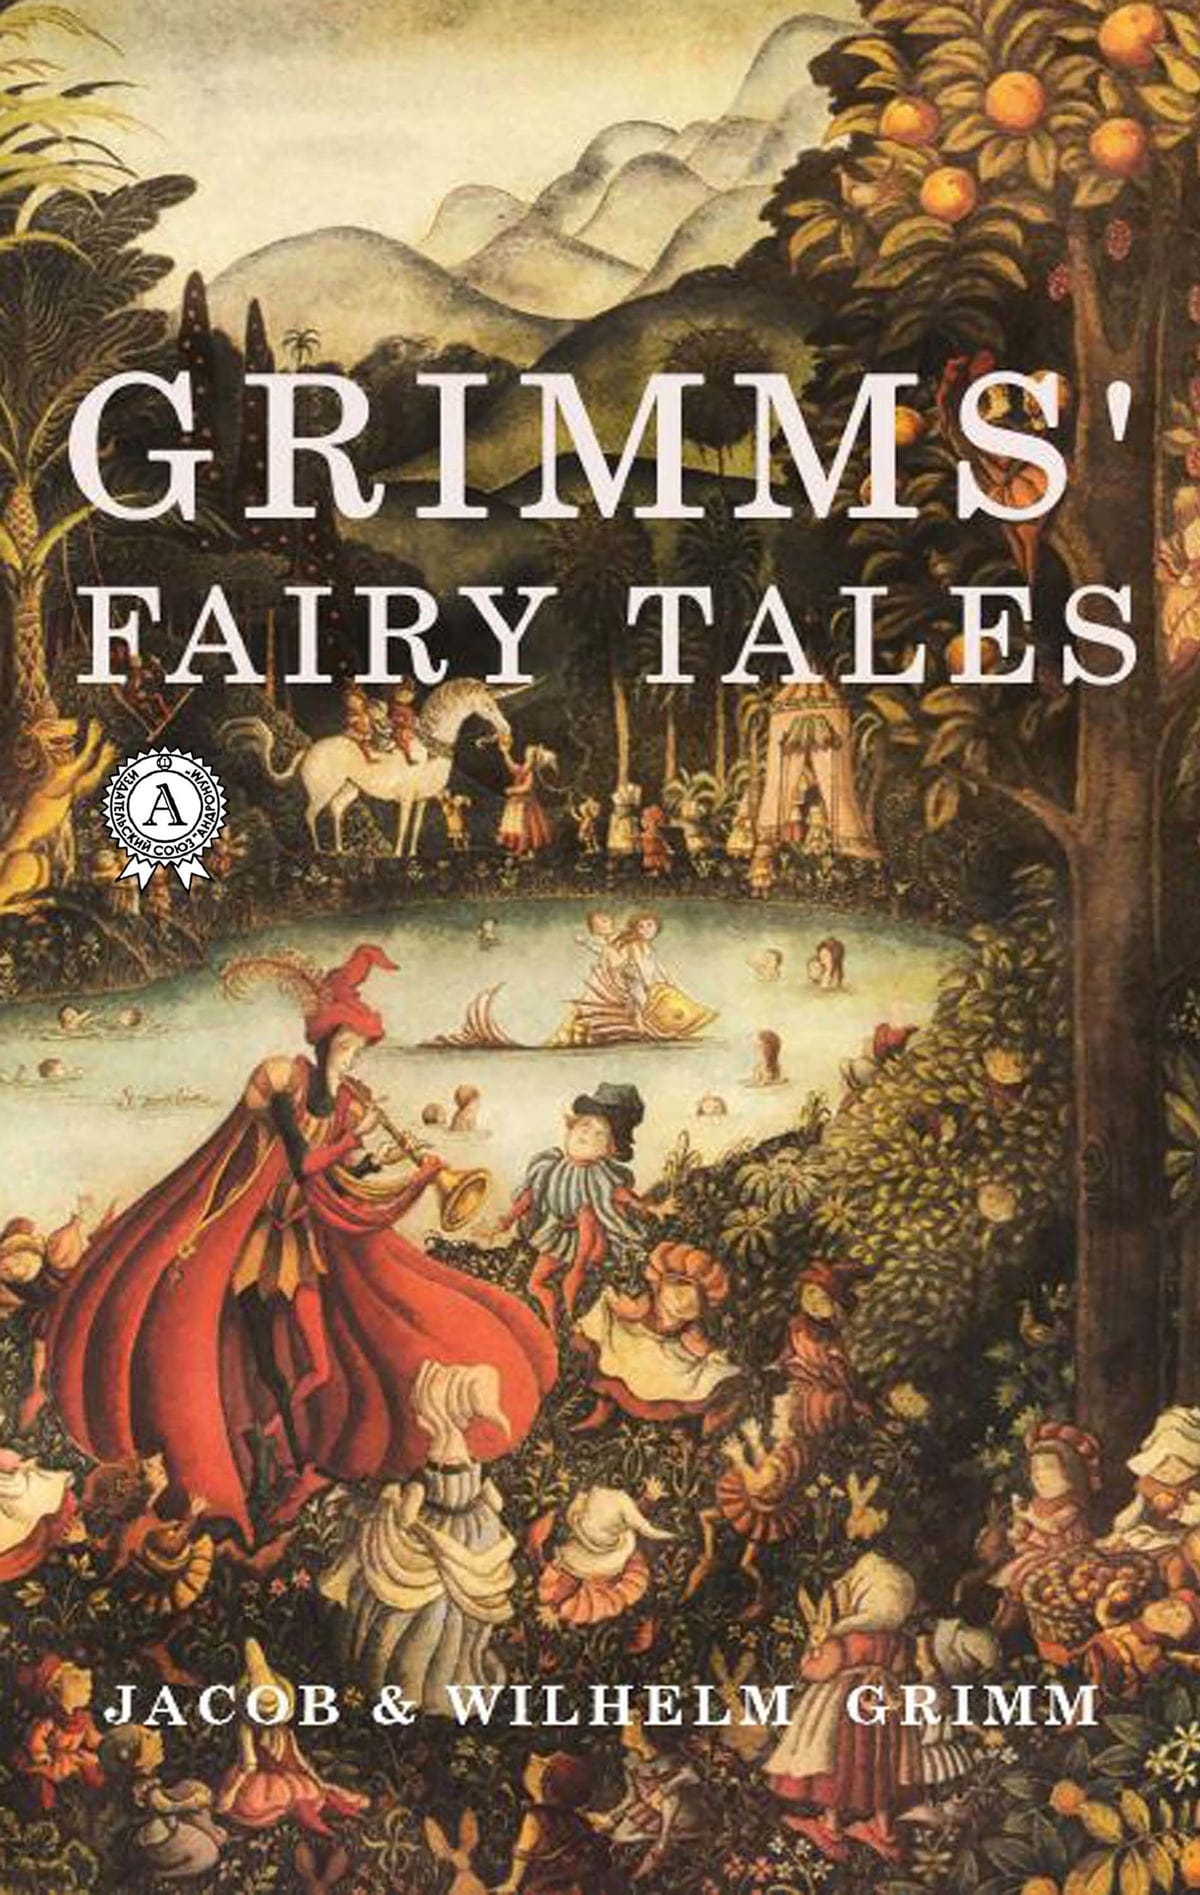 Brothers Grimm: Collecting fairy tales